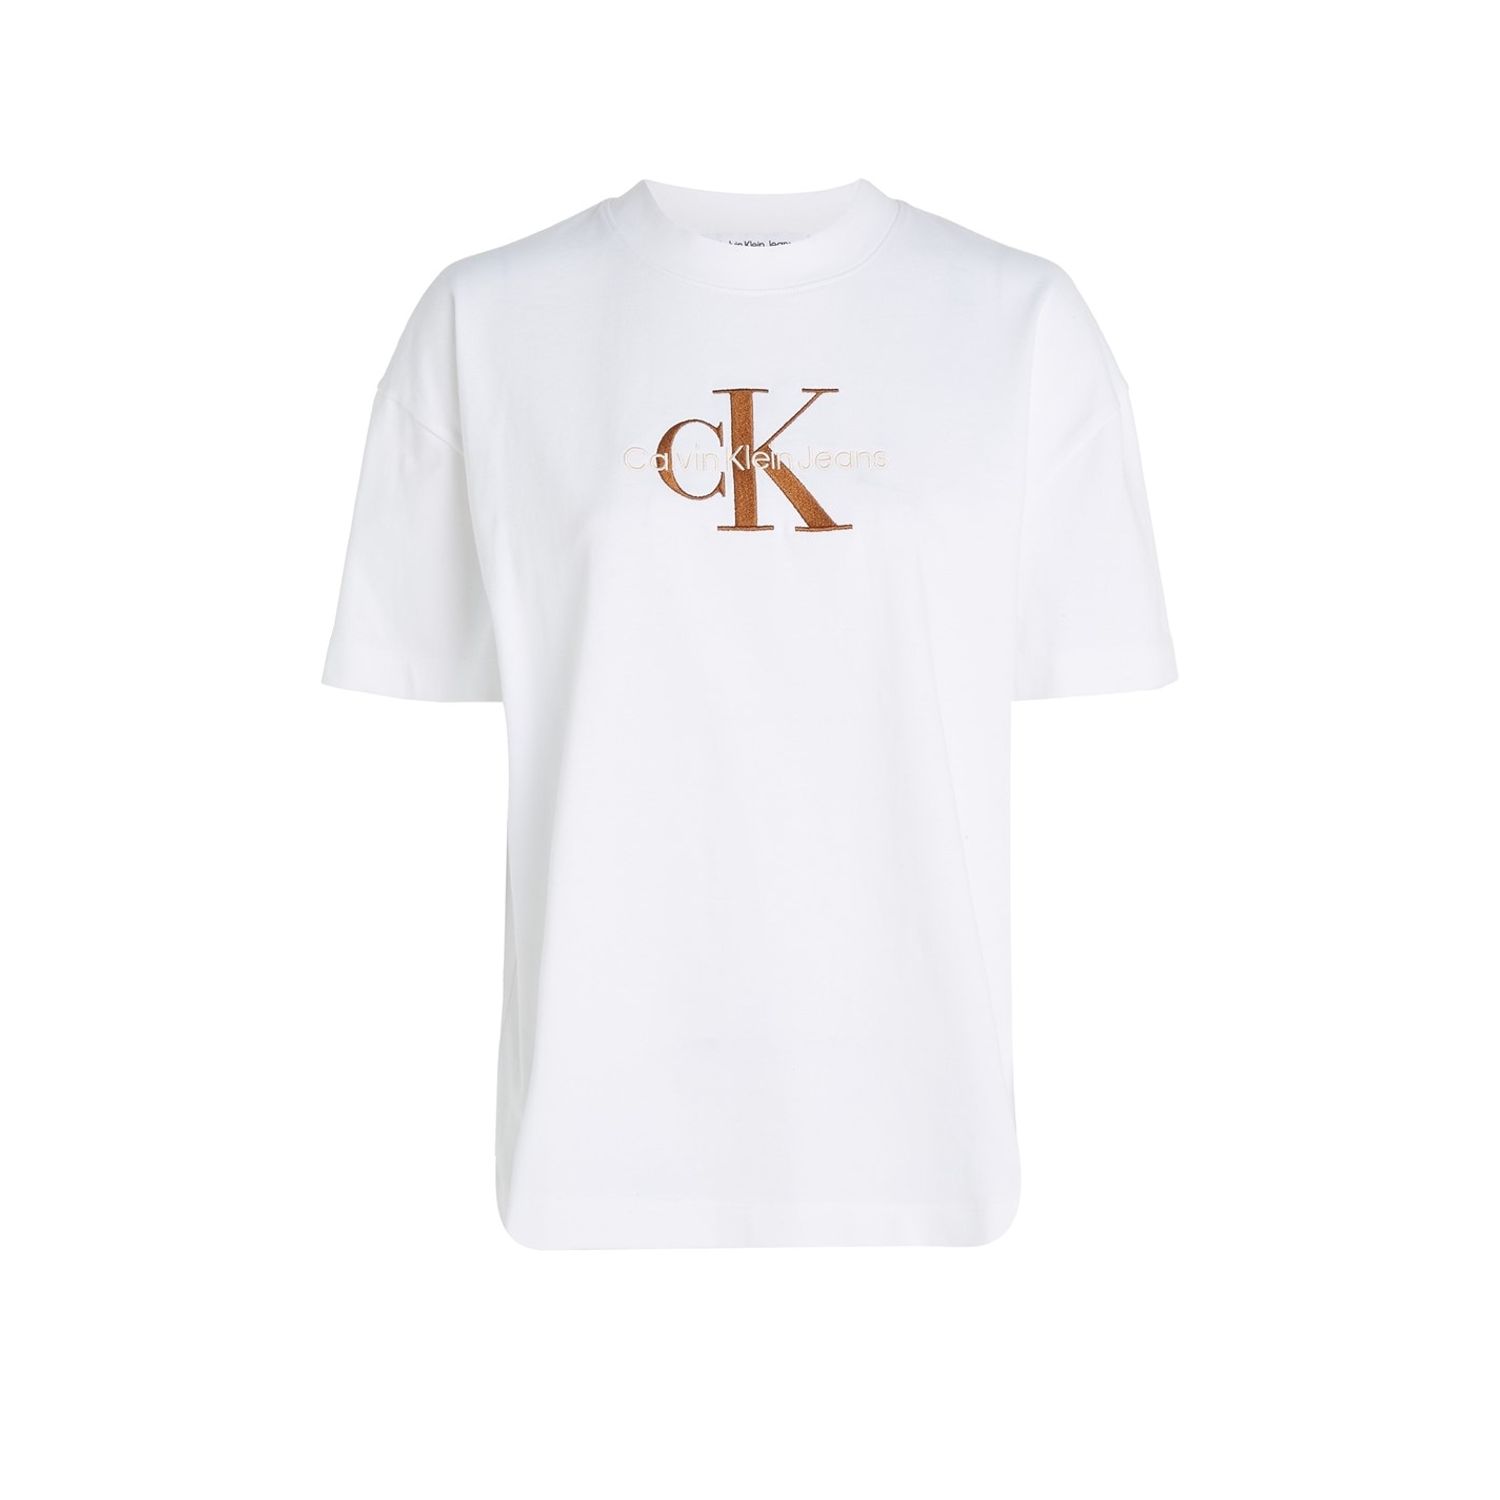 Calvin Klein Jeans white t-shirt with red CK logo